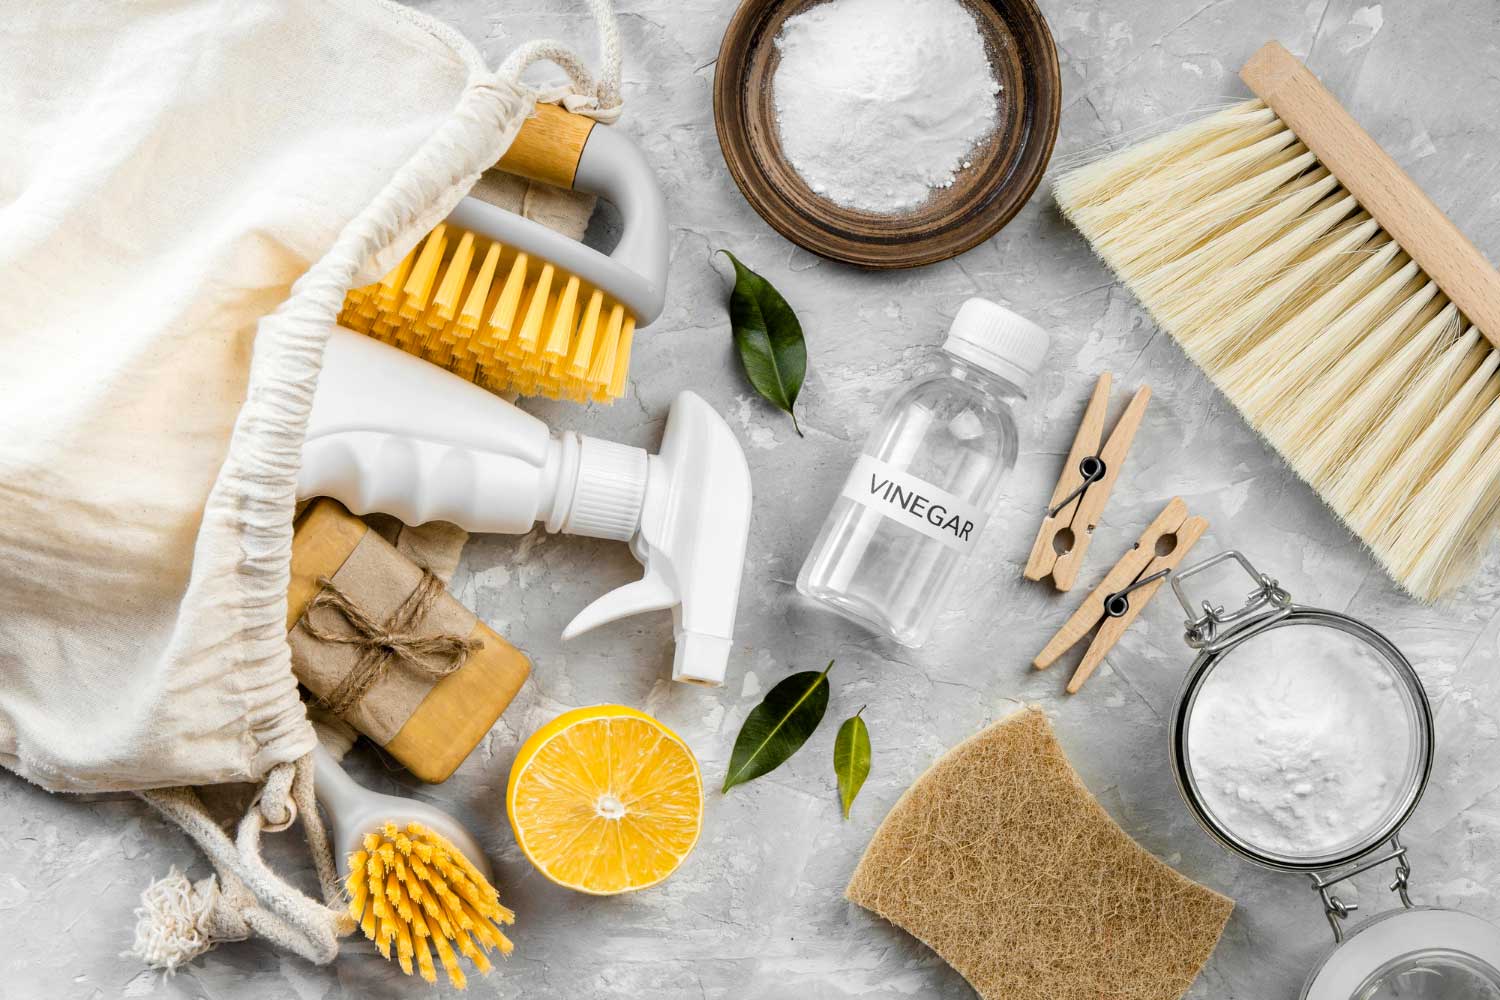 Flat lay of eco-friendly cleaning products with brushes and lemon